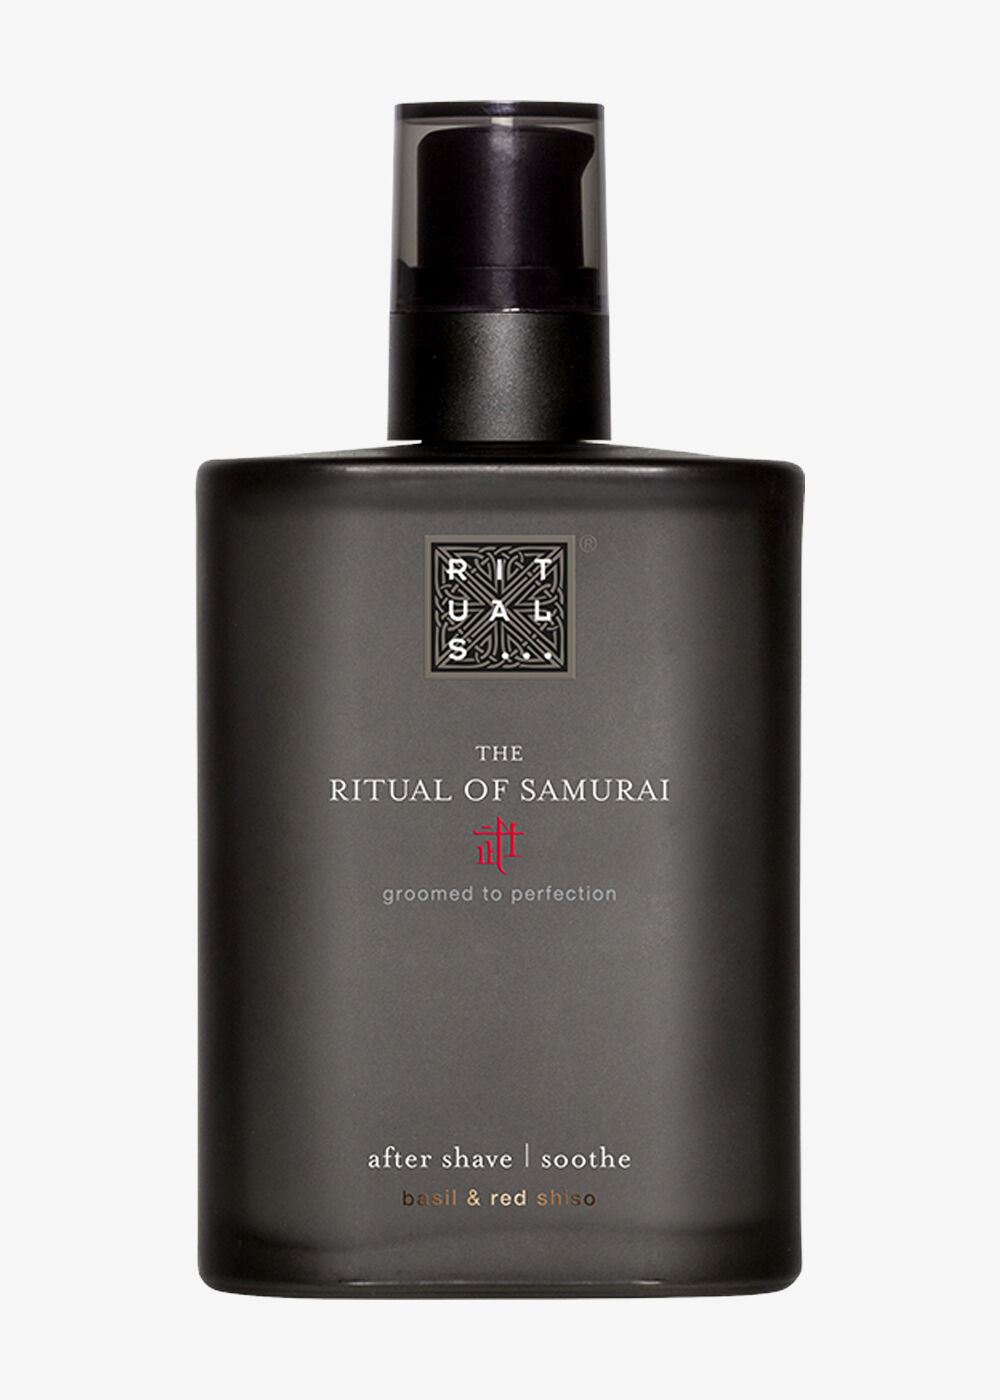 Aftershave The Ritual of Samurai After Shave Soothing Balm